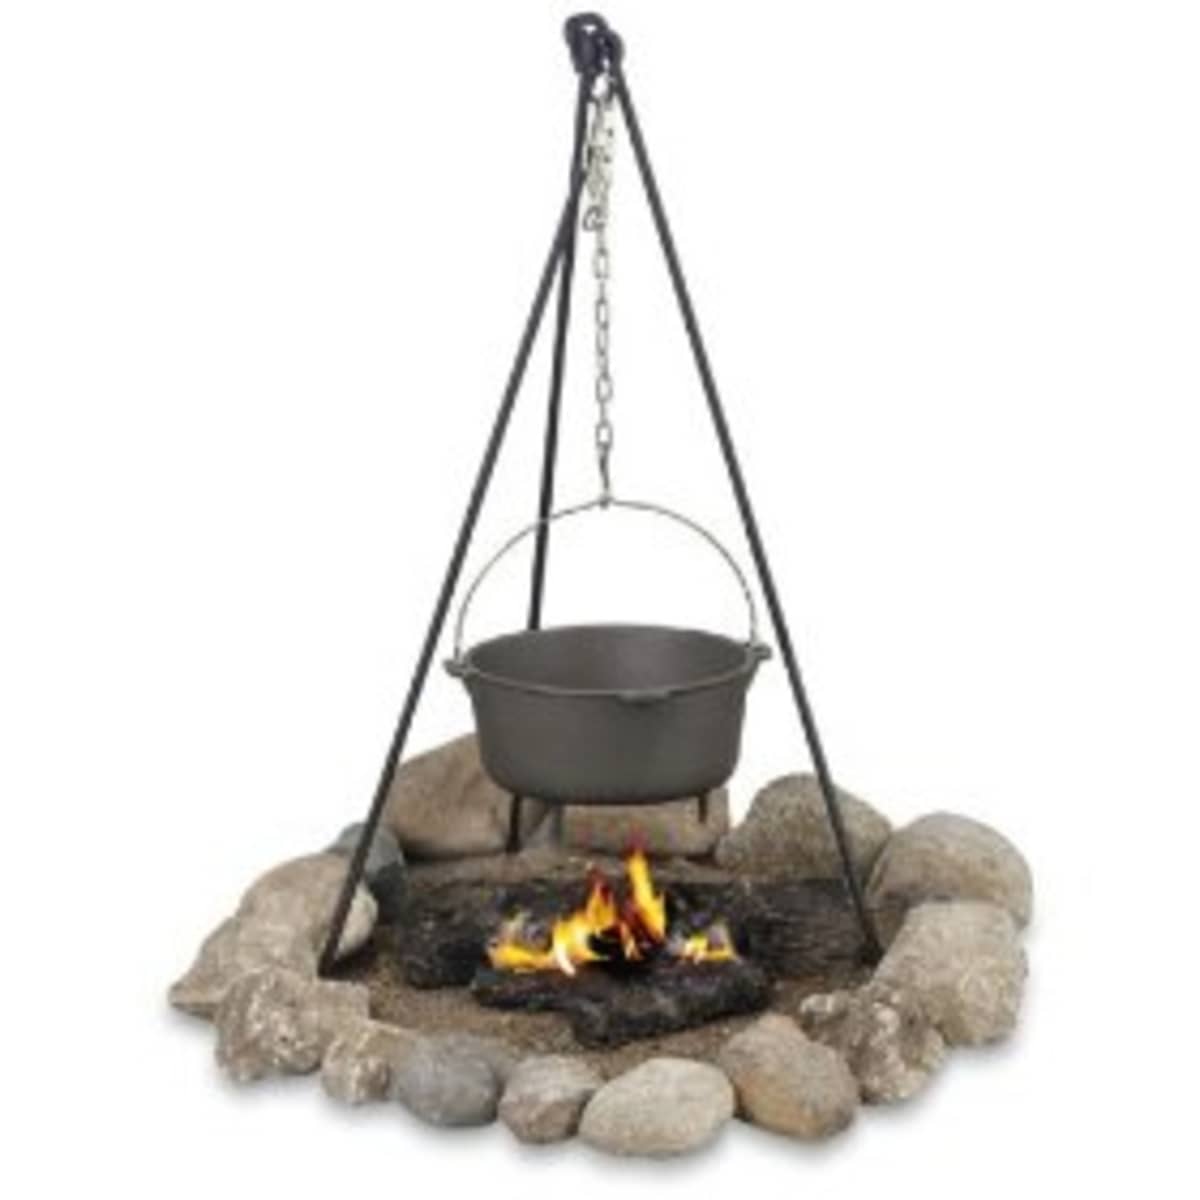 10 Easy Pieces: Open Fire Cook Stoves - Gardenista  Fire pit cooking, Open  fire cooking, Dutch oven cooking